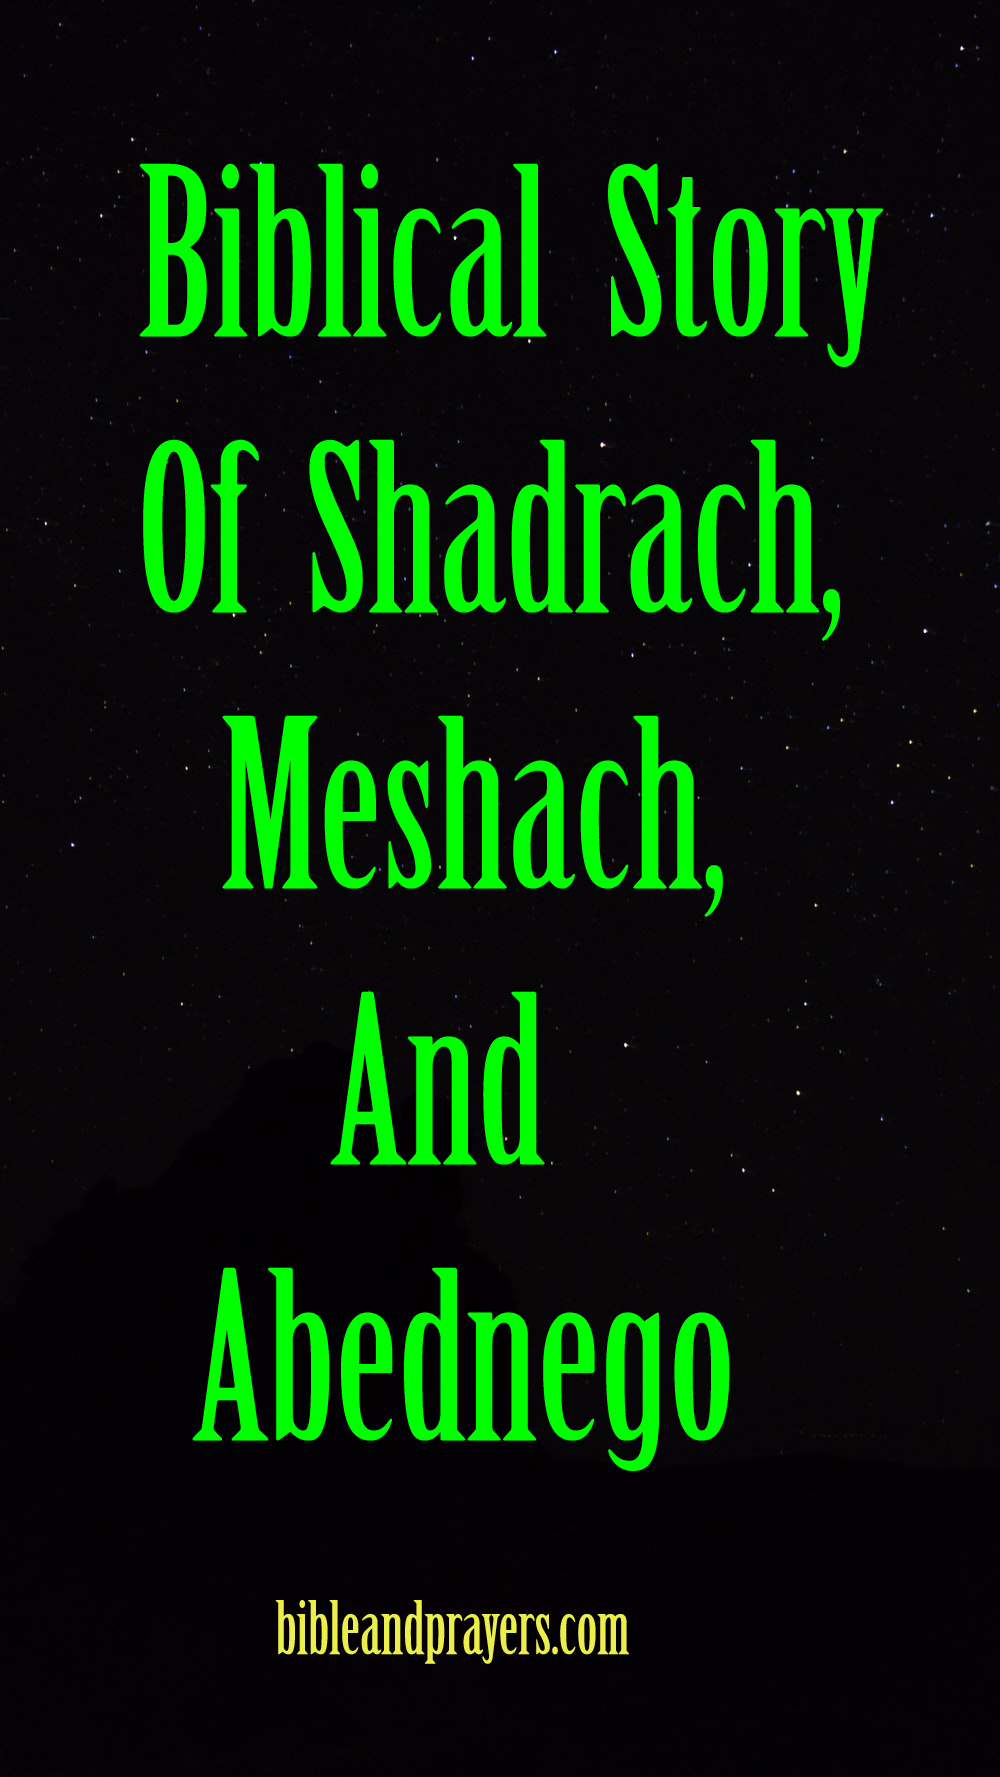 Biblical Story Of Shadrach, Meshach, And Abednego